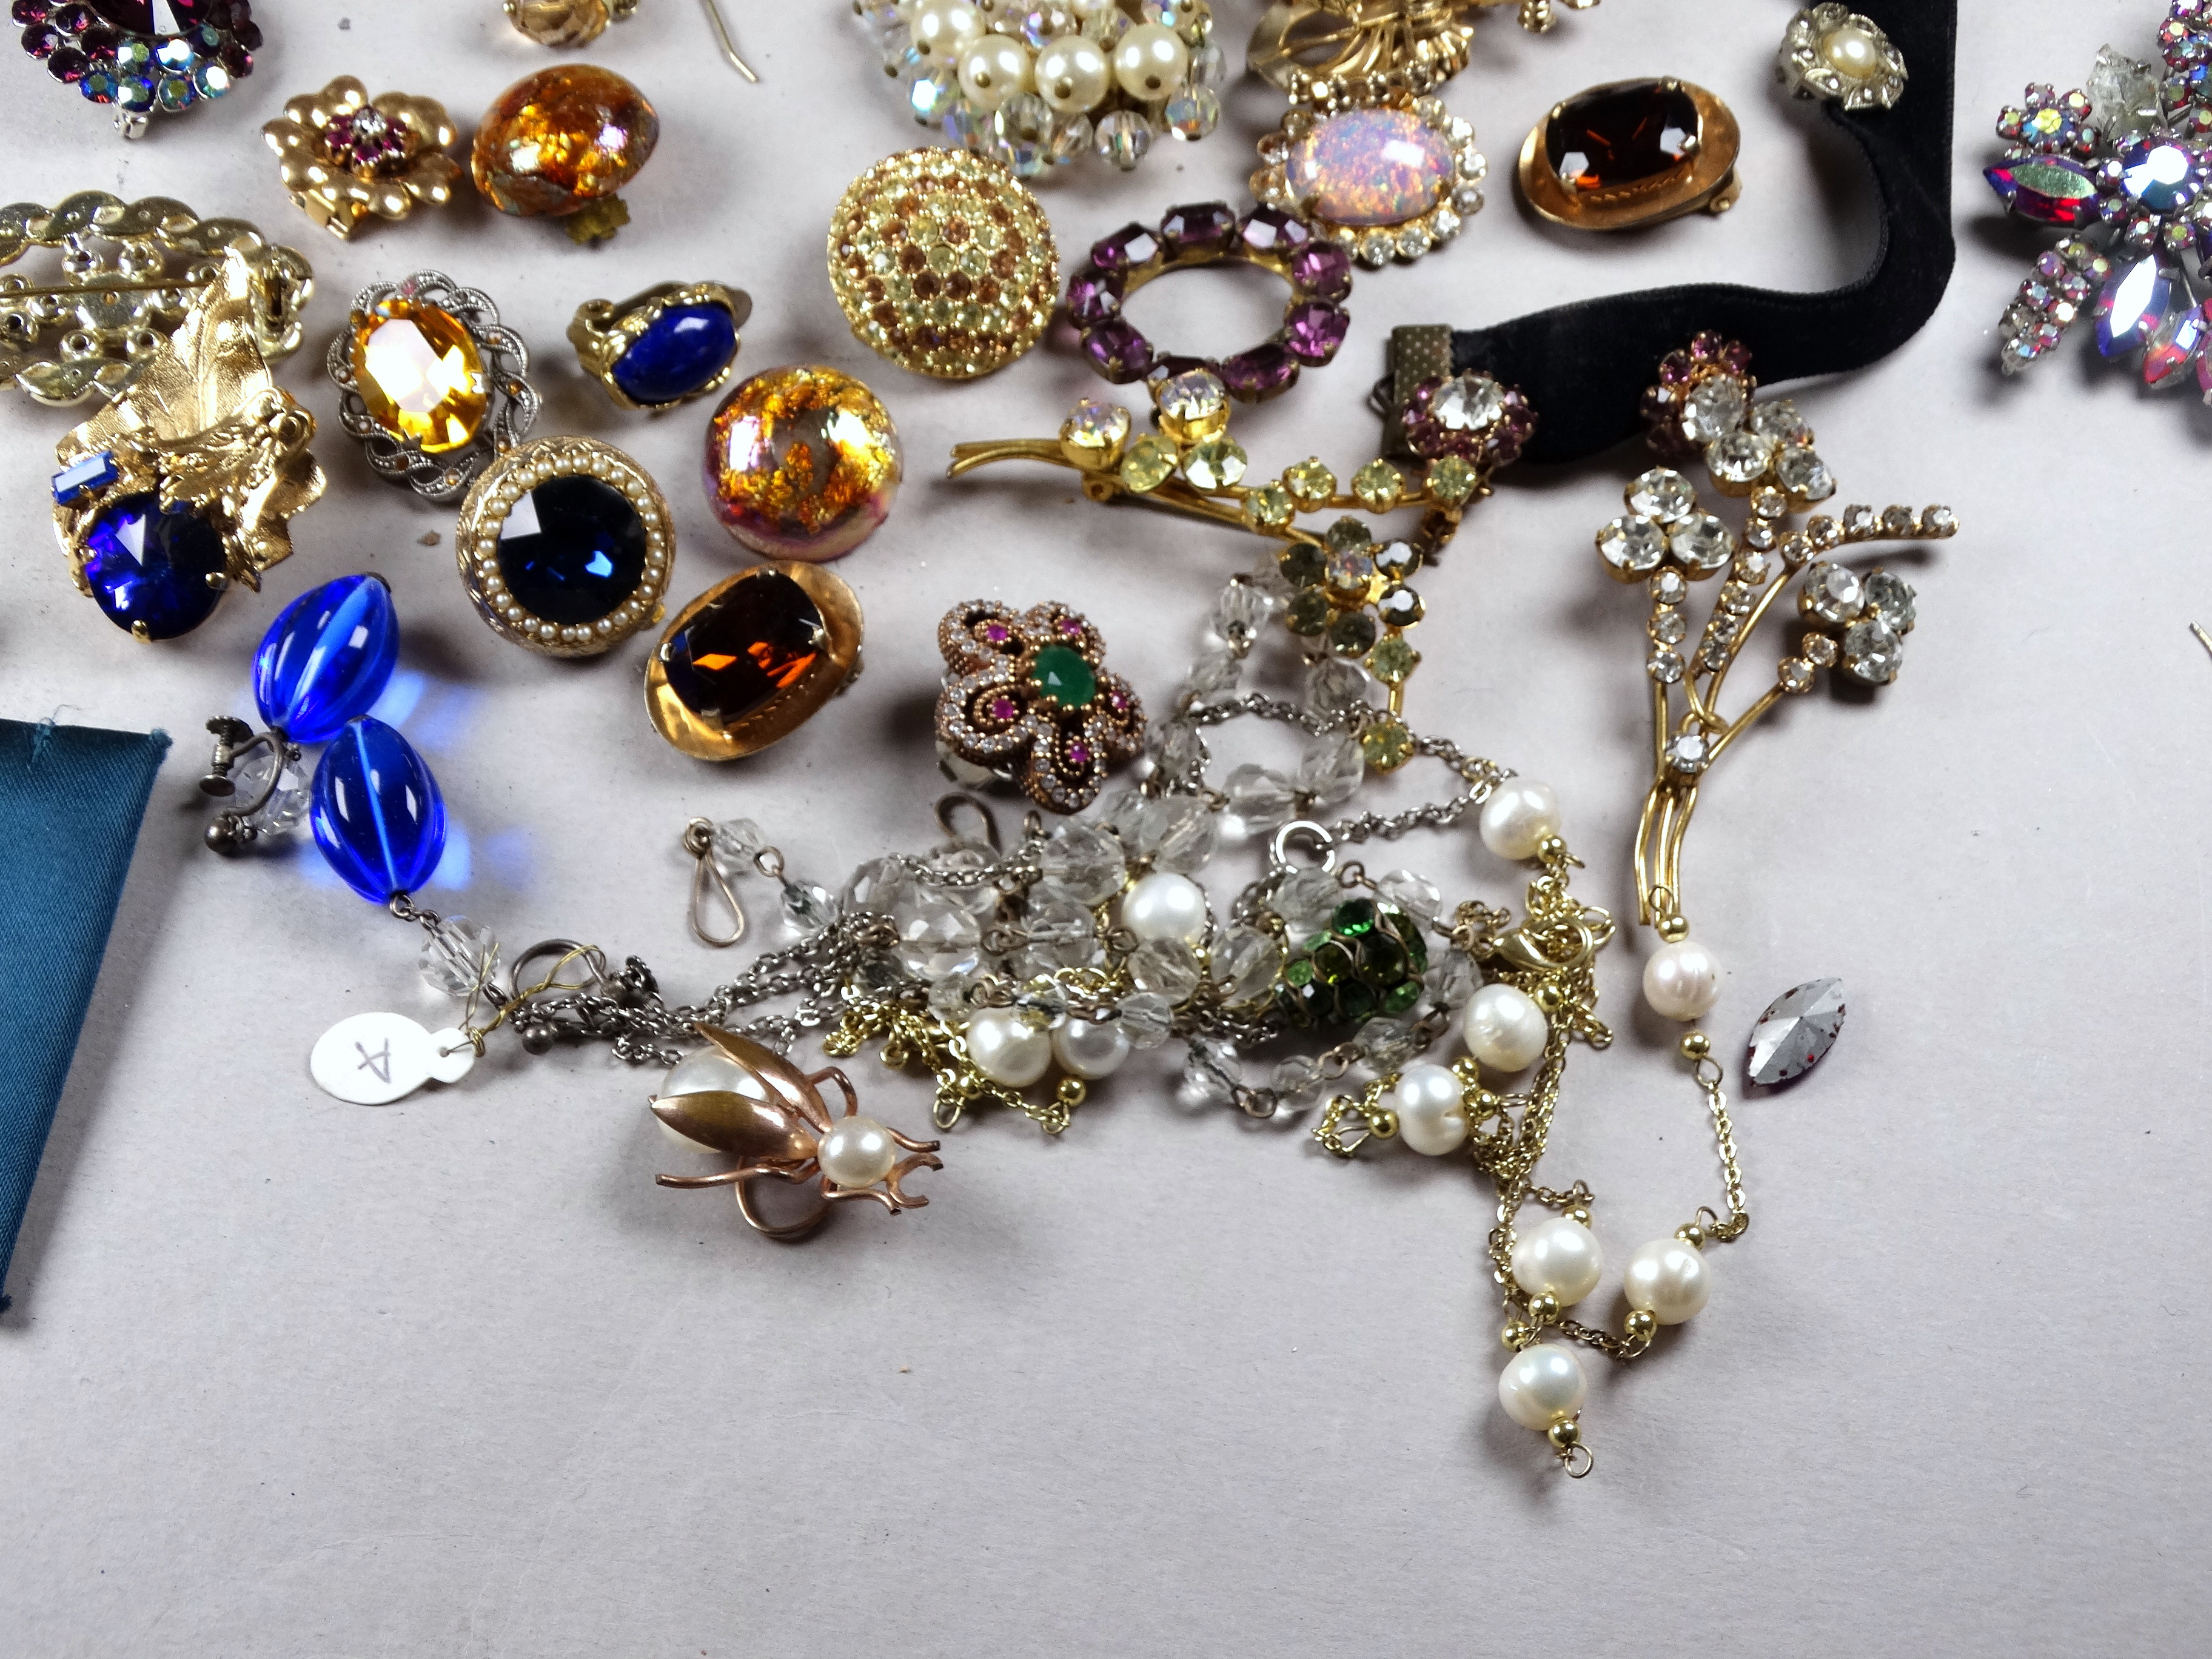 A quantity of costume jewellery - including a faux pearl collar. - Image 2 of 5